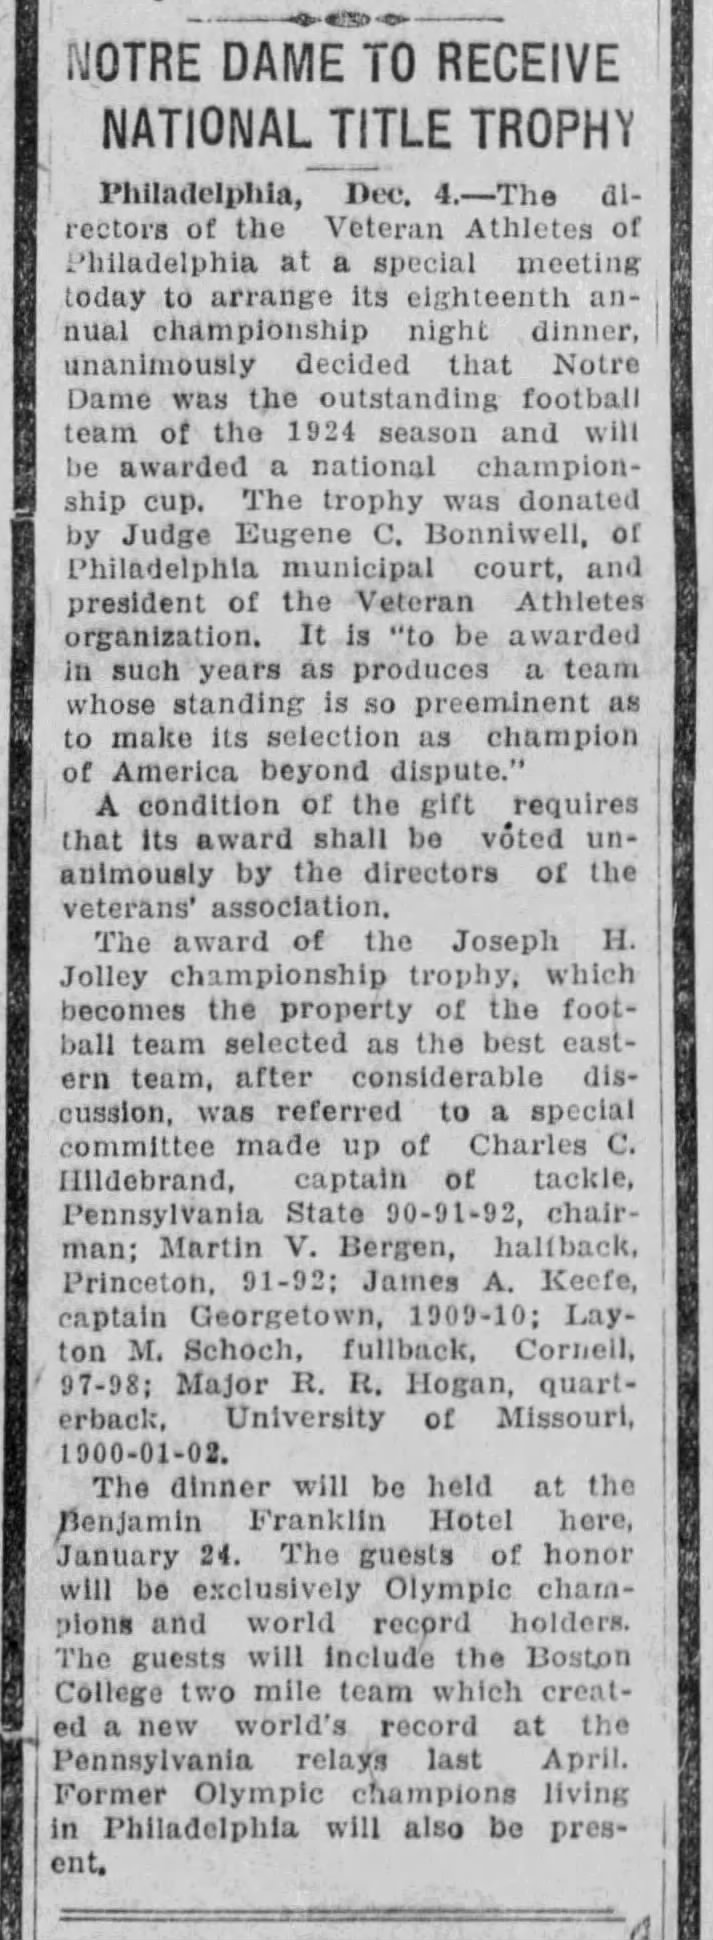 1924 Notre Dame to Receive National Title Trophy Bonniwell Trophy Veteran Athletes of Philadelphia